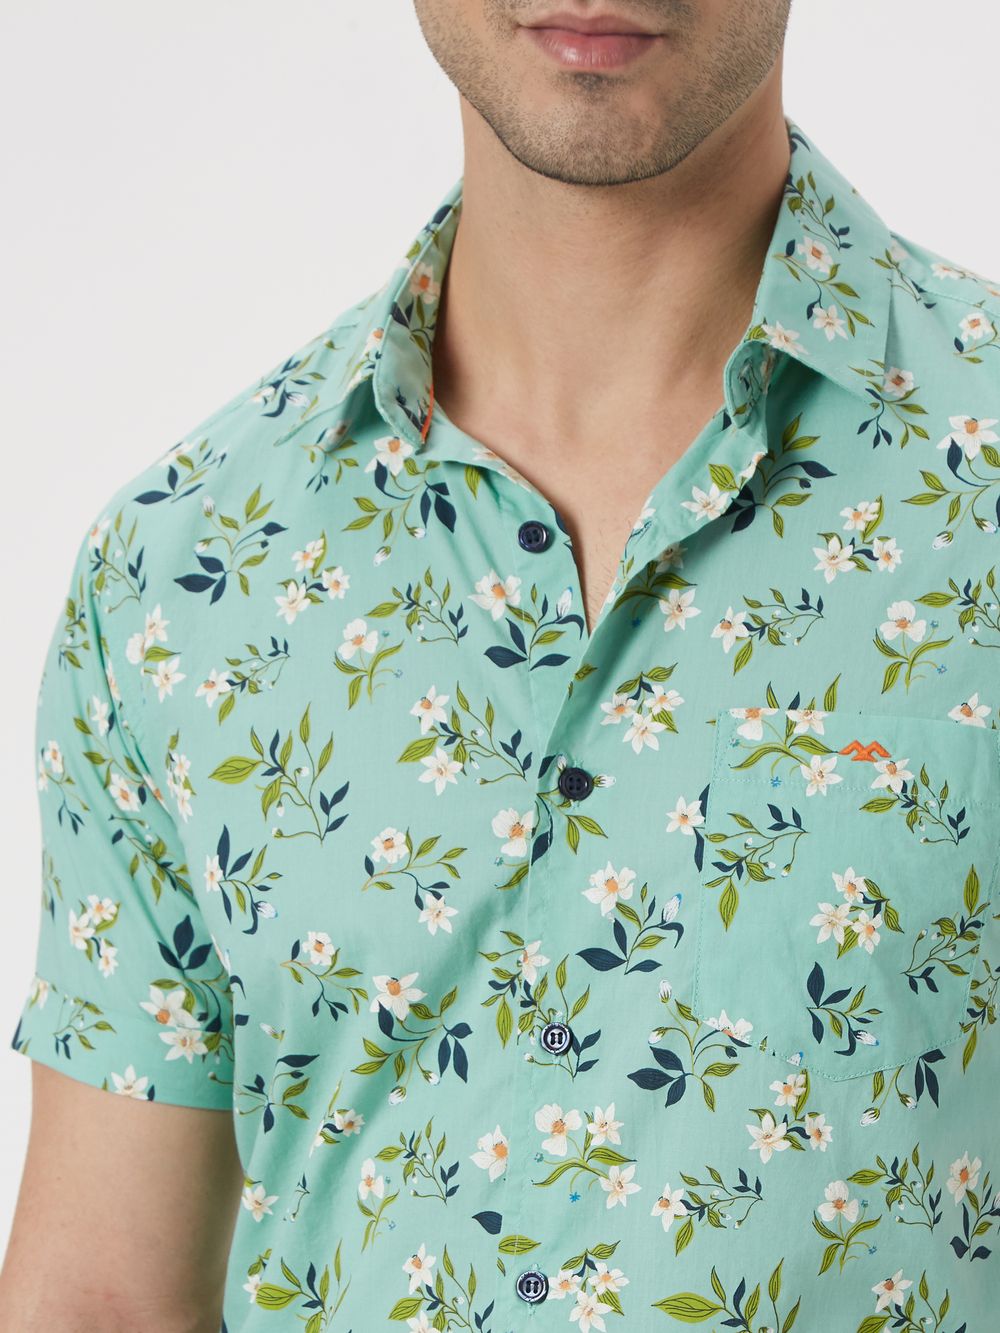 Light Green & White Floral Print Slim Fit Casual Shirt